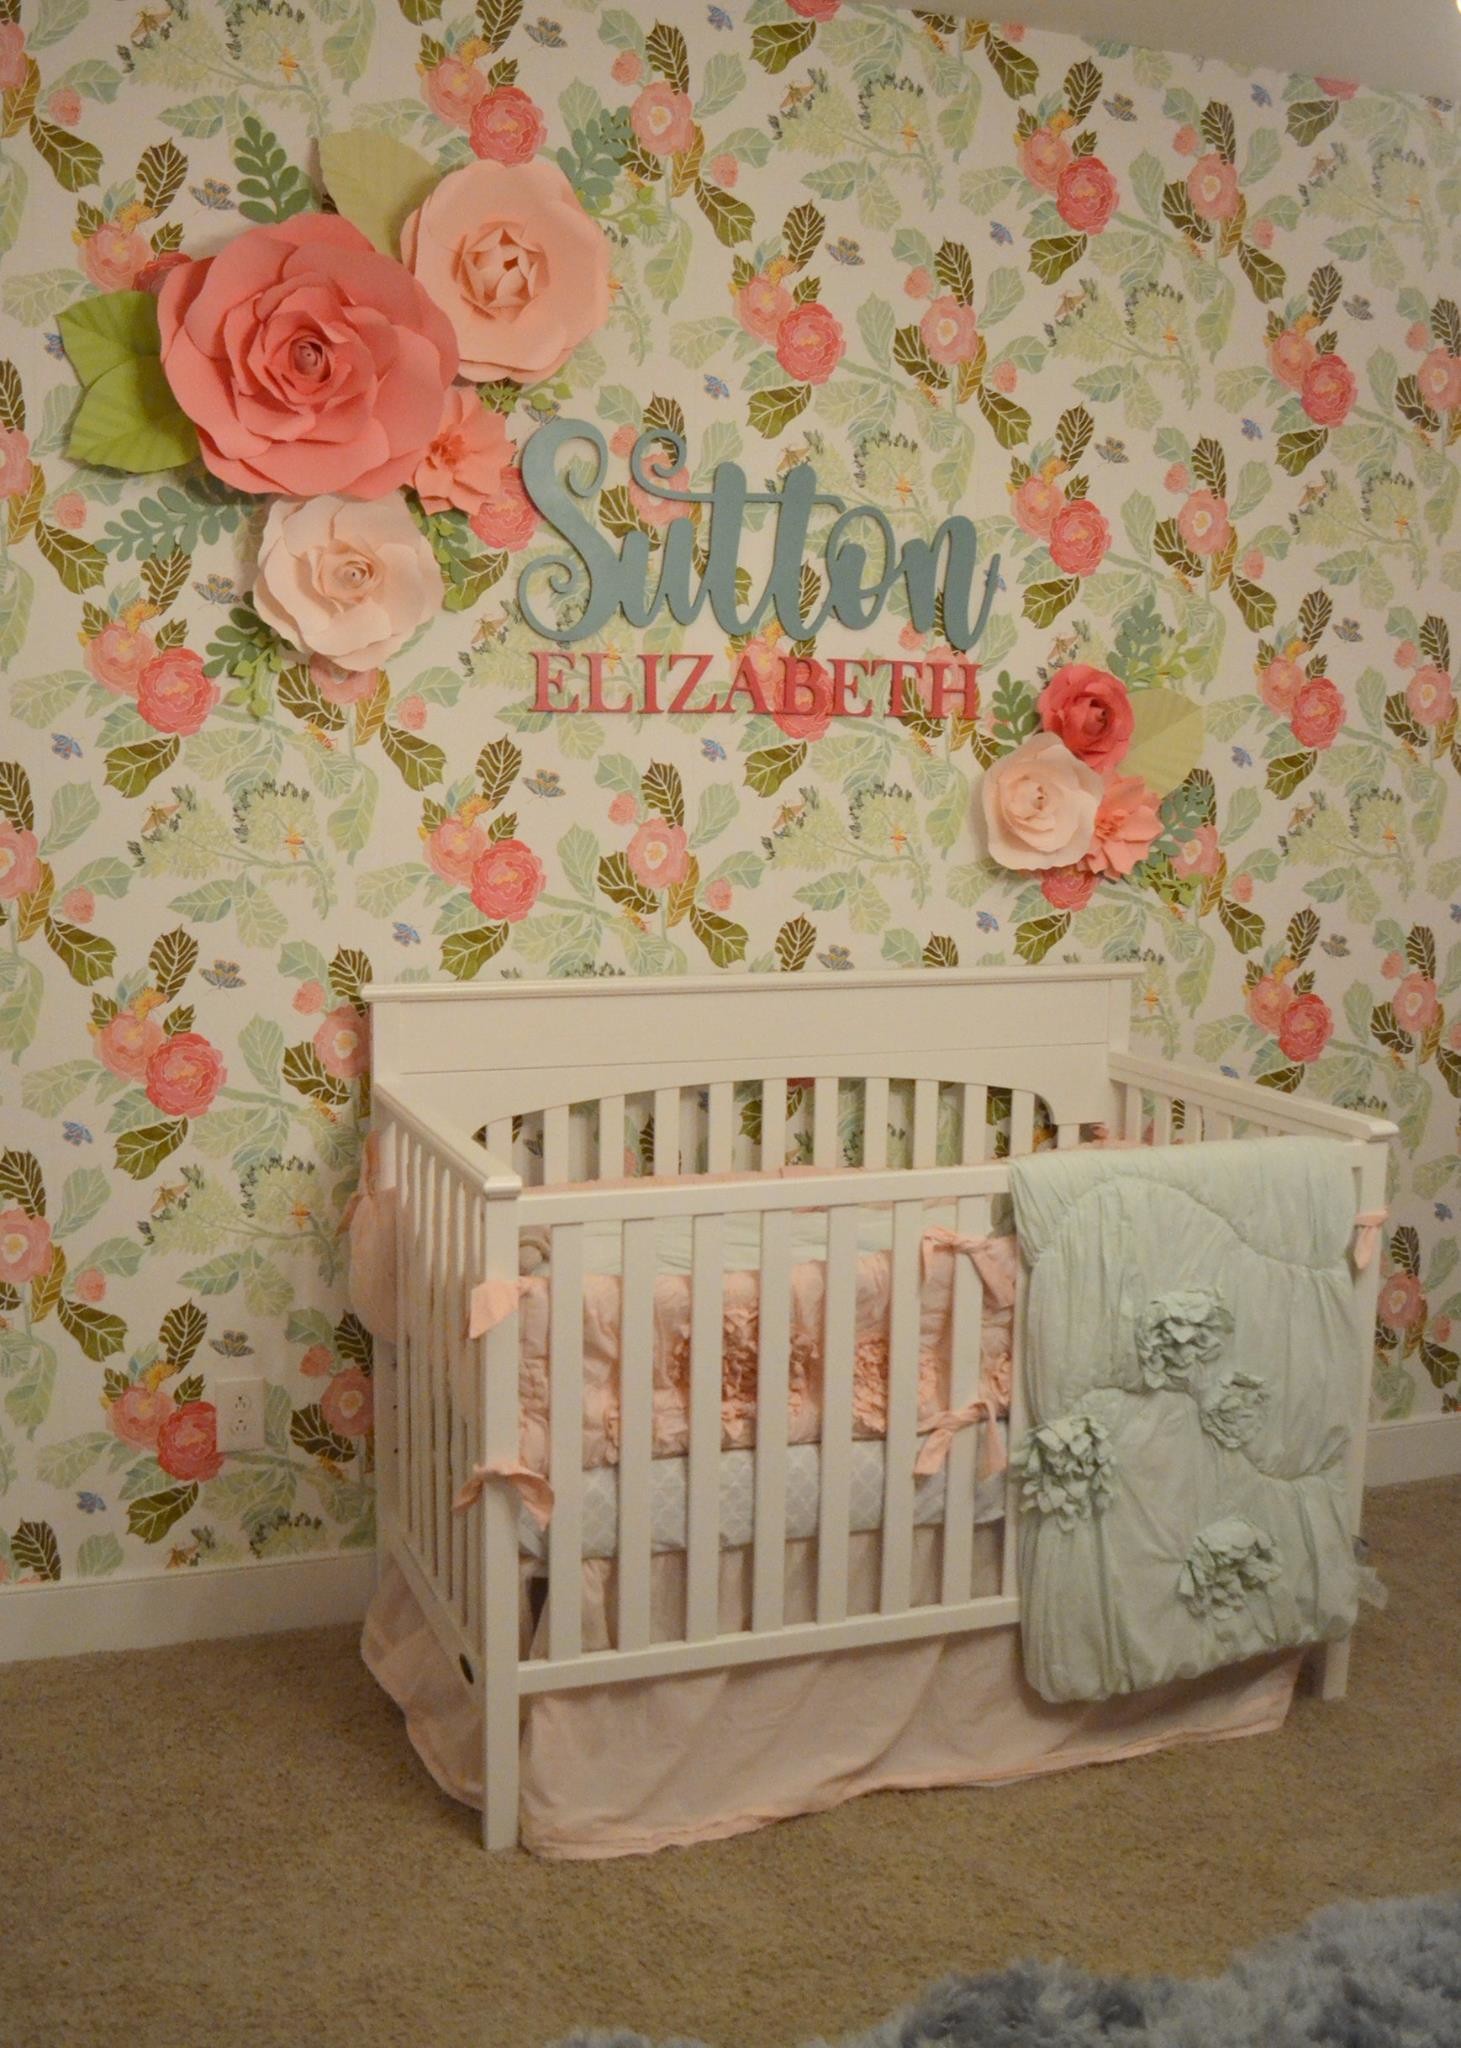 How much are you swooning over this floral nursery wallpaper Its gorgeous in a vintage